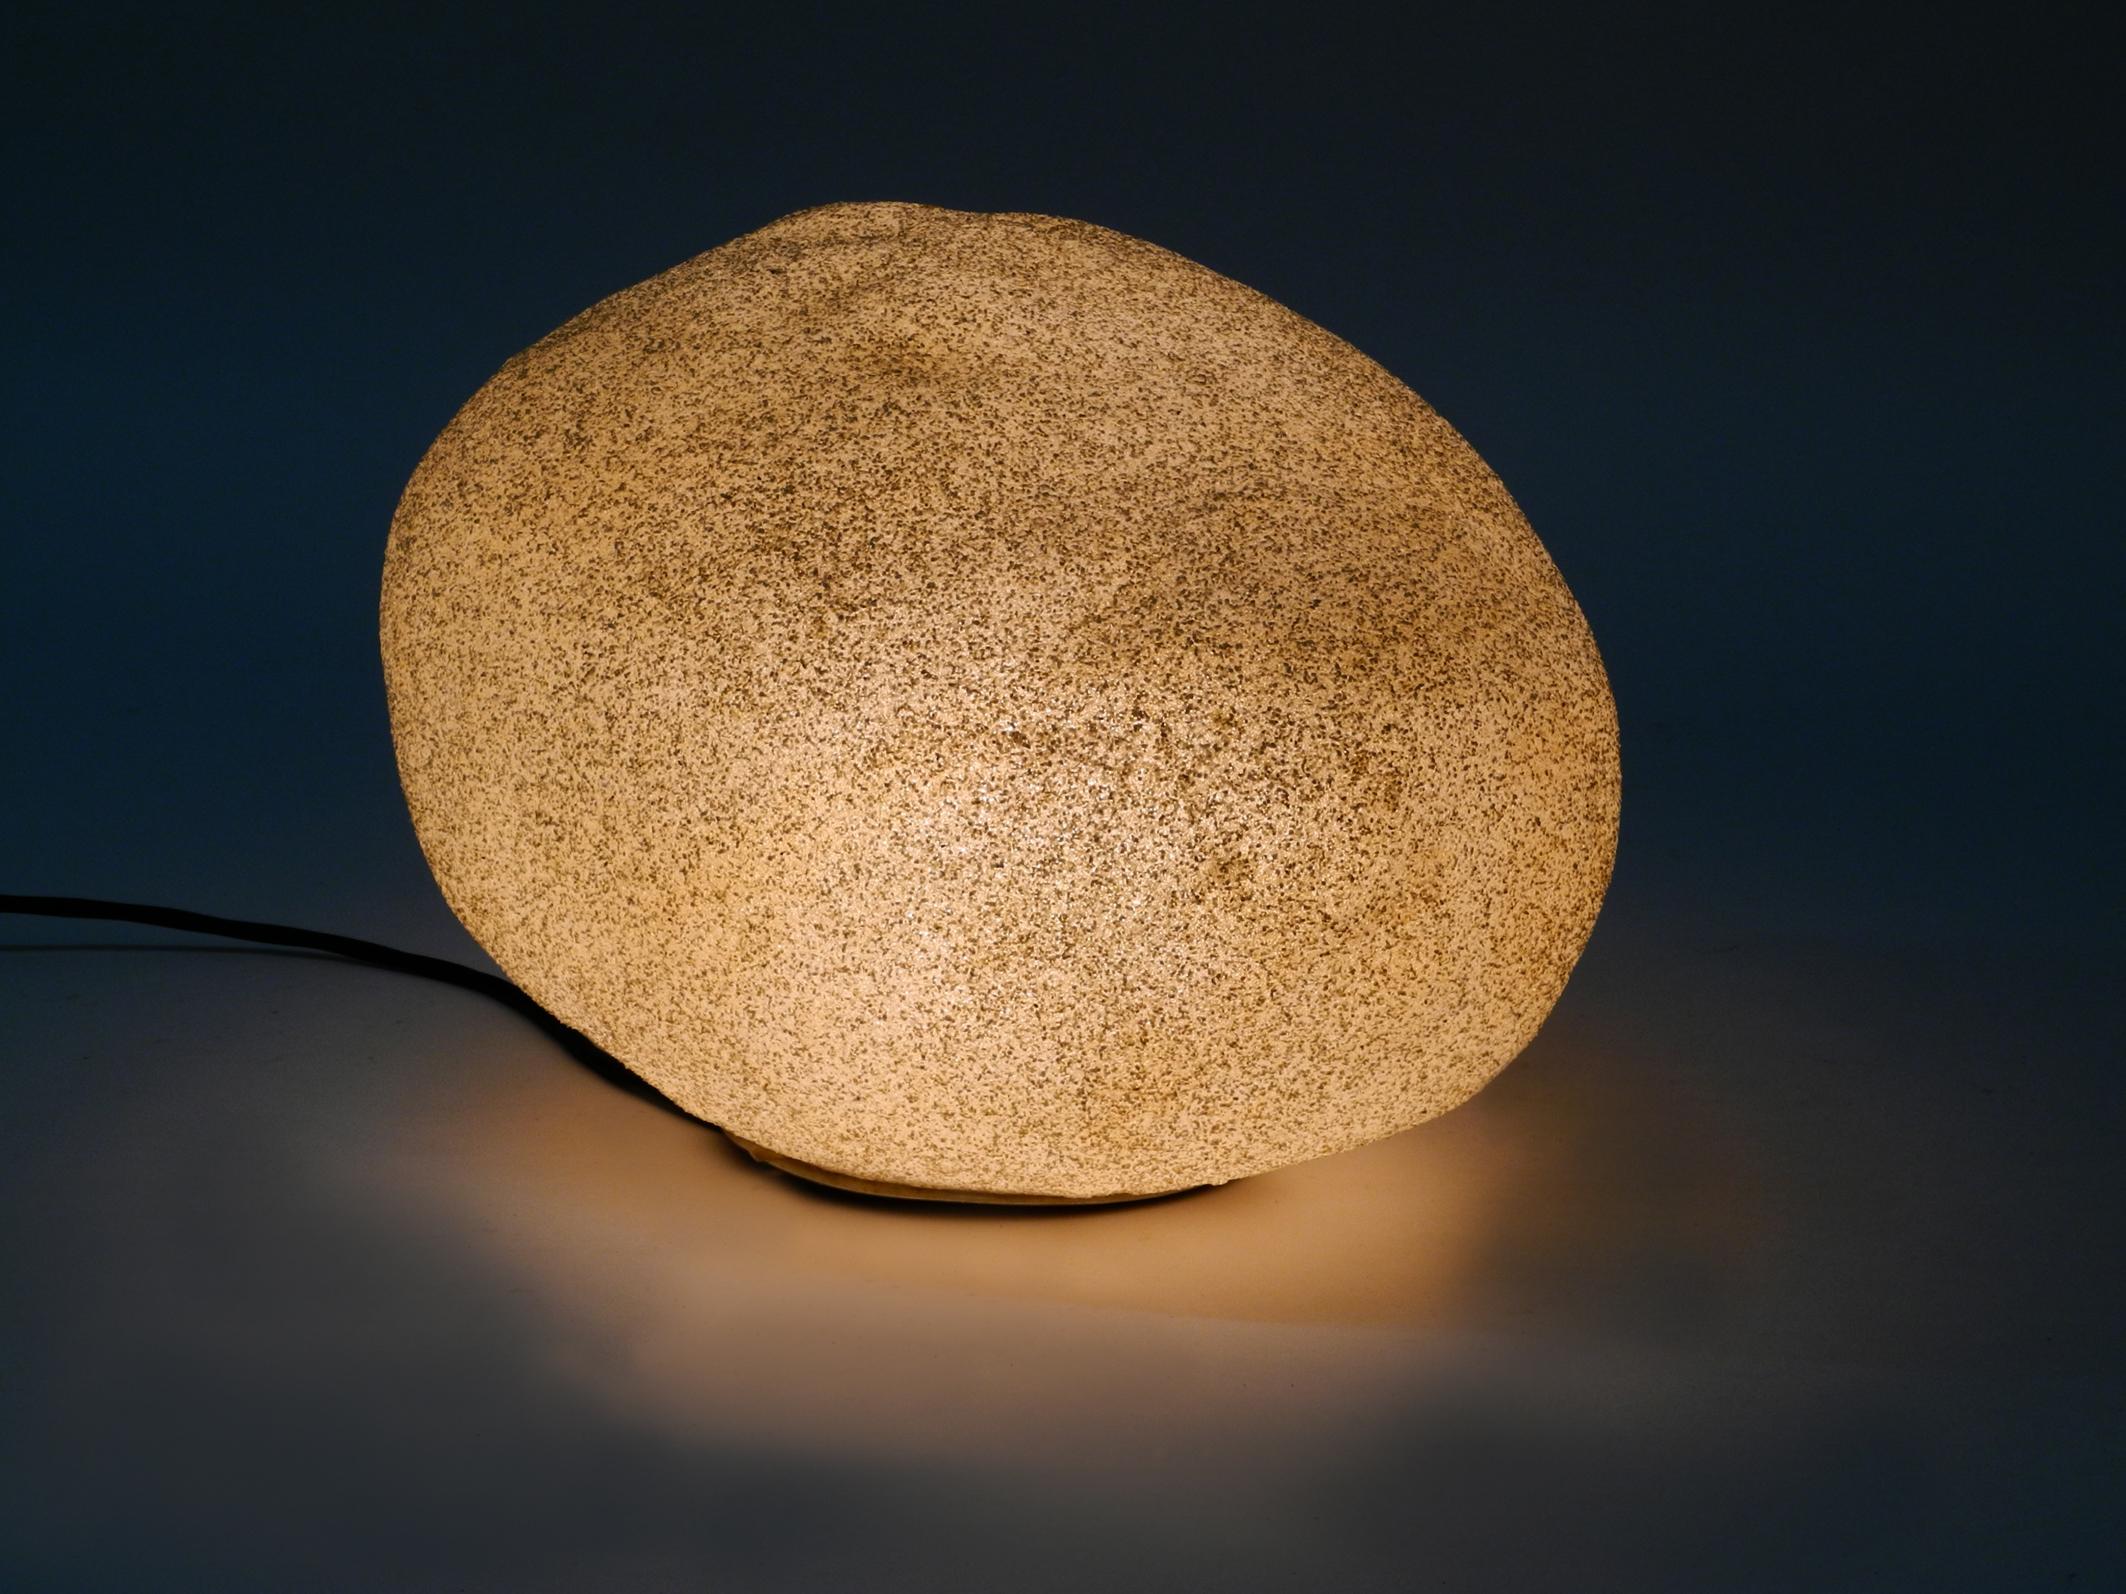 XL Tecta 1960s Floor Lamp Made of Fiberglass in the Shape of a Stone or Rock 3